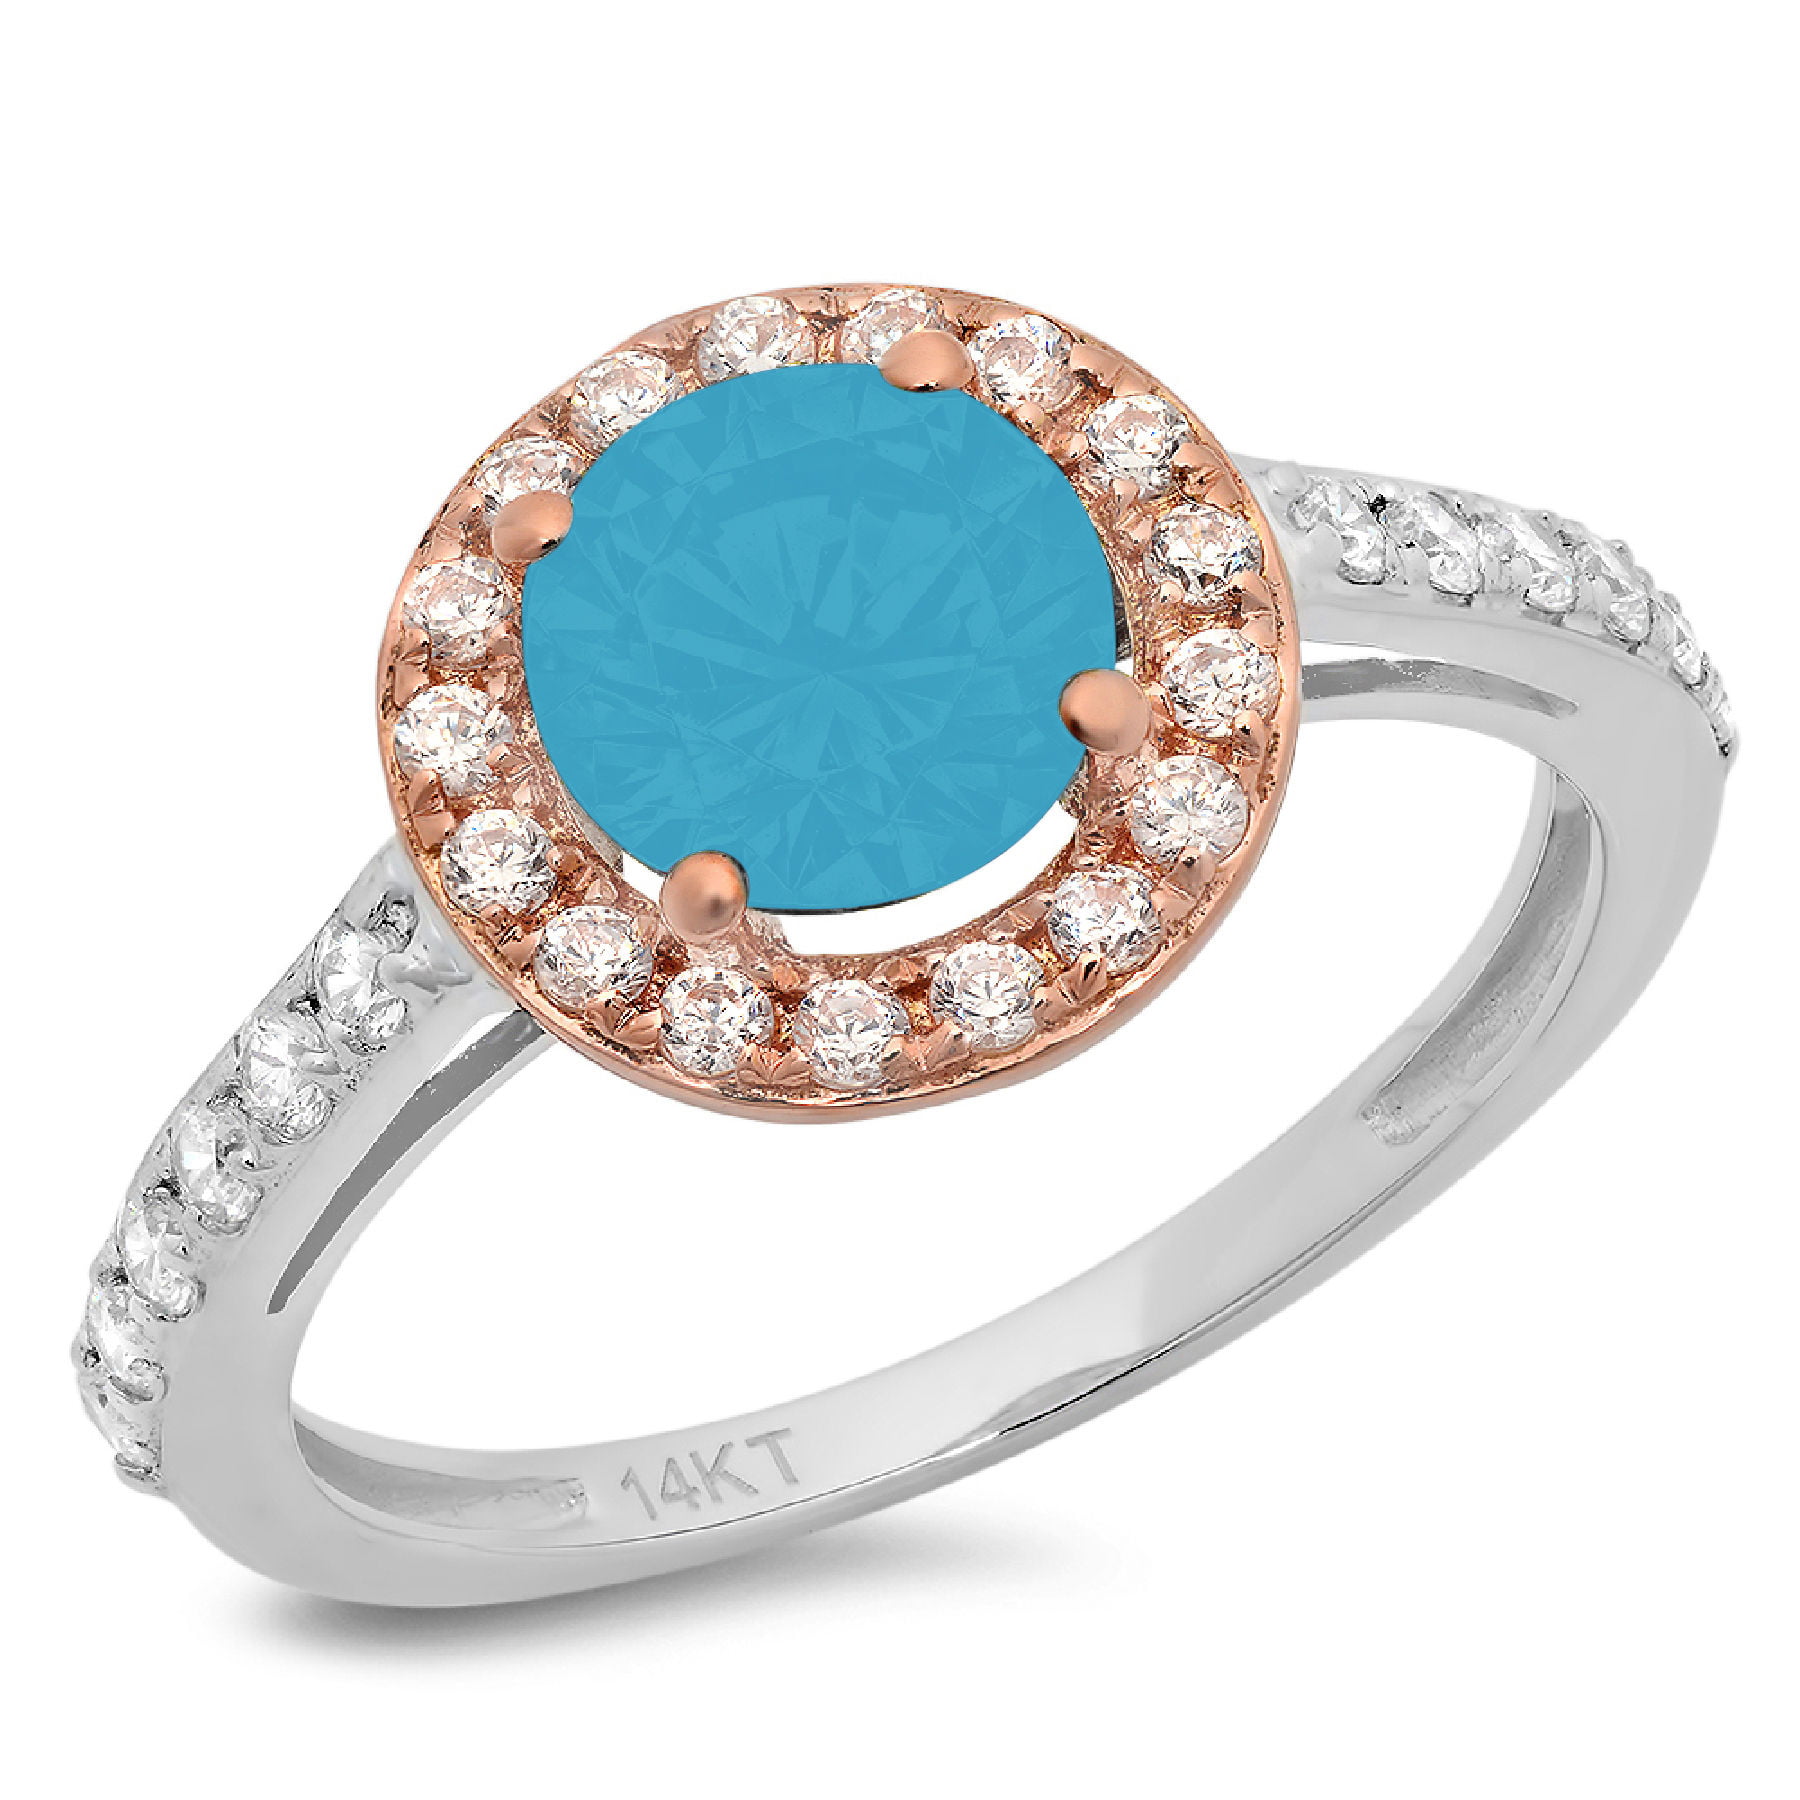 2.37 ct Brilliant Round Cut VVS1 Simulated Turquoise White Solid 14k or 18k Gold Robotic Laser Engraved Halo Solitaire with Accents Ring